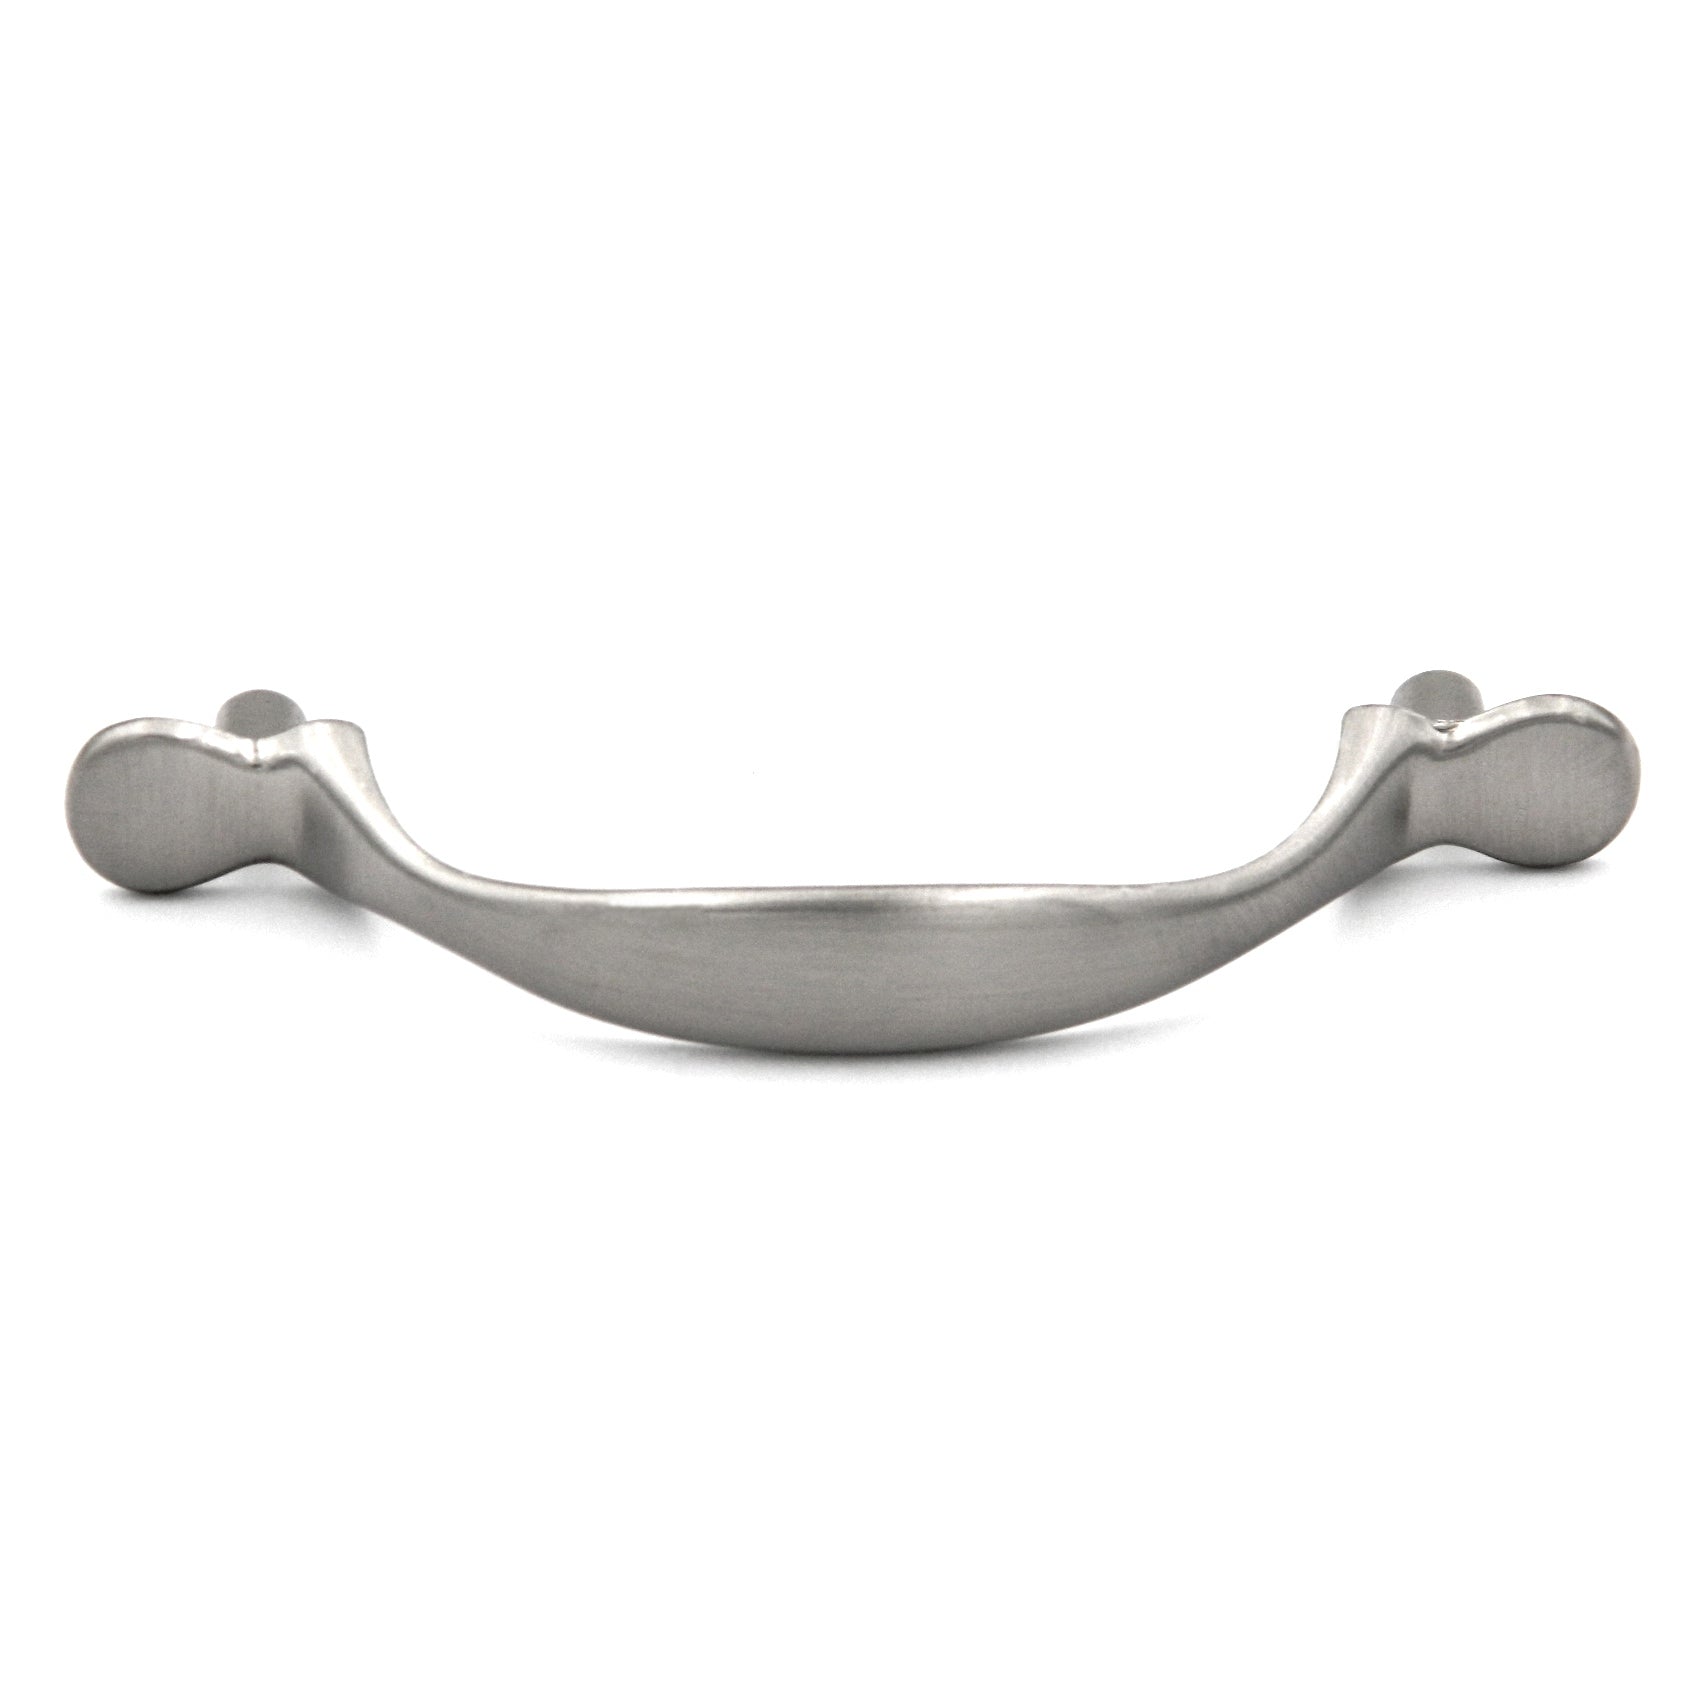 10 Pack Hickory's Conquest P14170-SN Satin Nickel 3"cc Arch Cabinet Handle Pulls